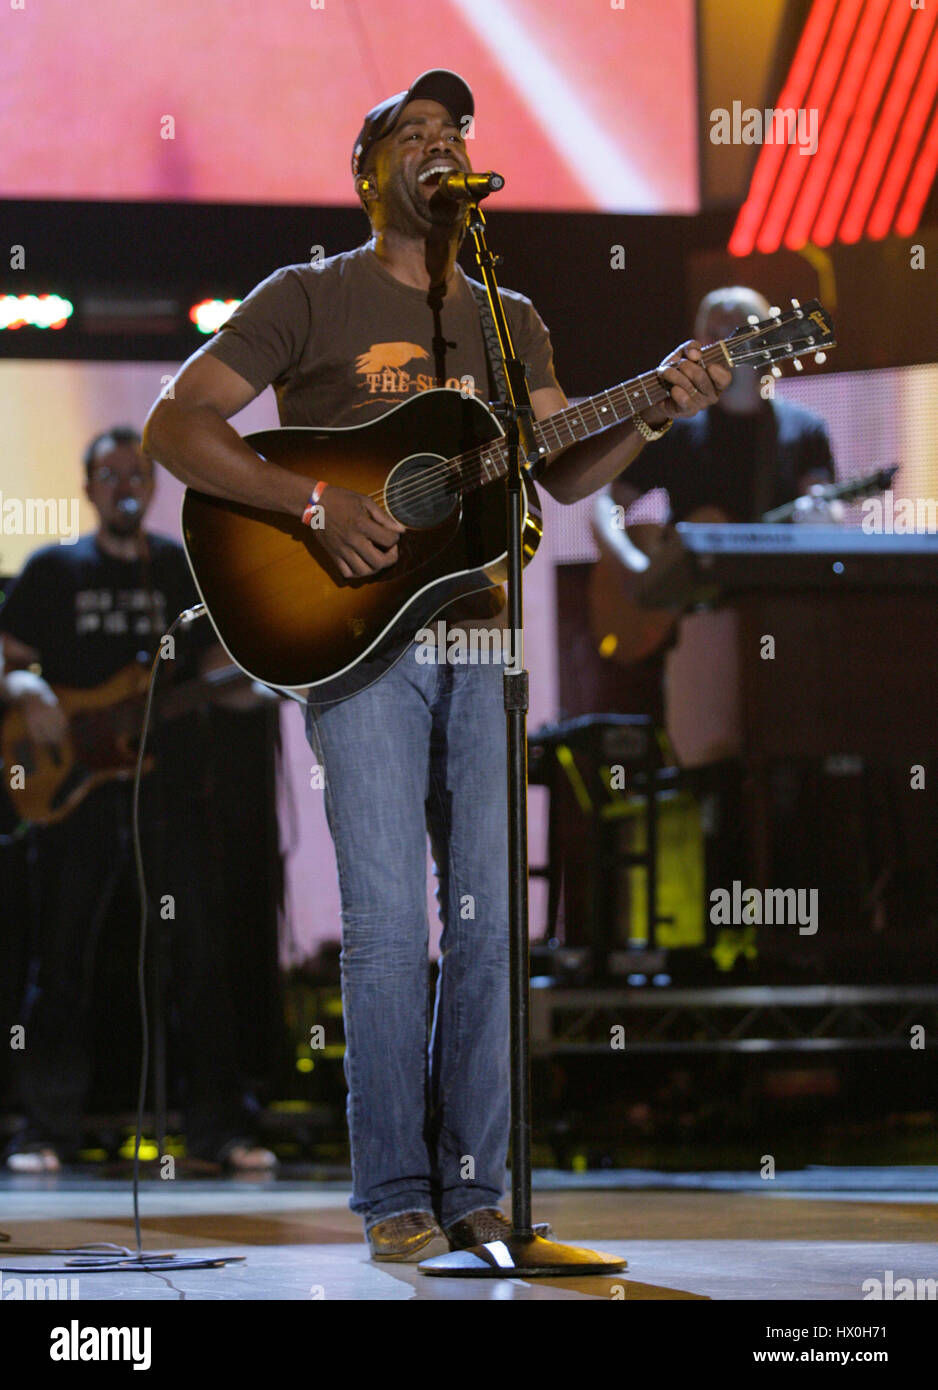 Darius Rucker performs during rehearsals for the 45th Academy of Country Music Awards at the MGM Grand Garden Arena in Las Vegas, Nevada on April 17, 2010. Photo by Francis Specker Stock Photo